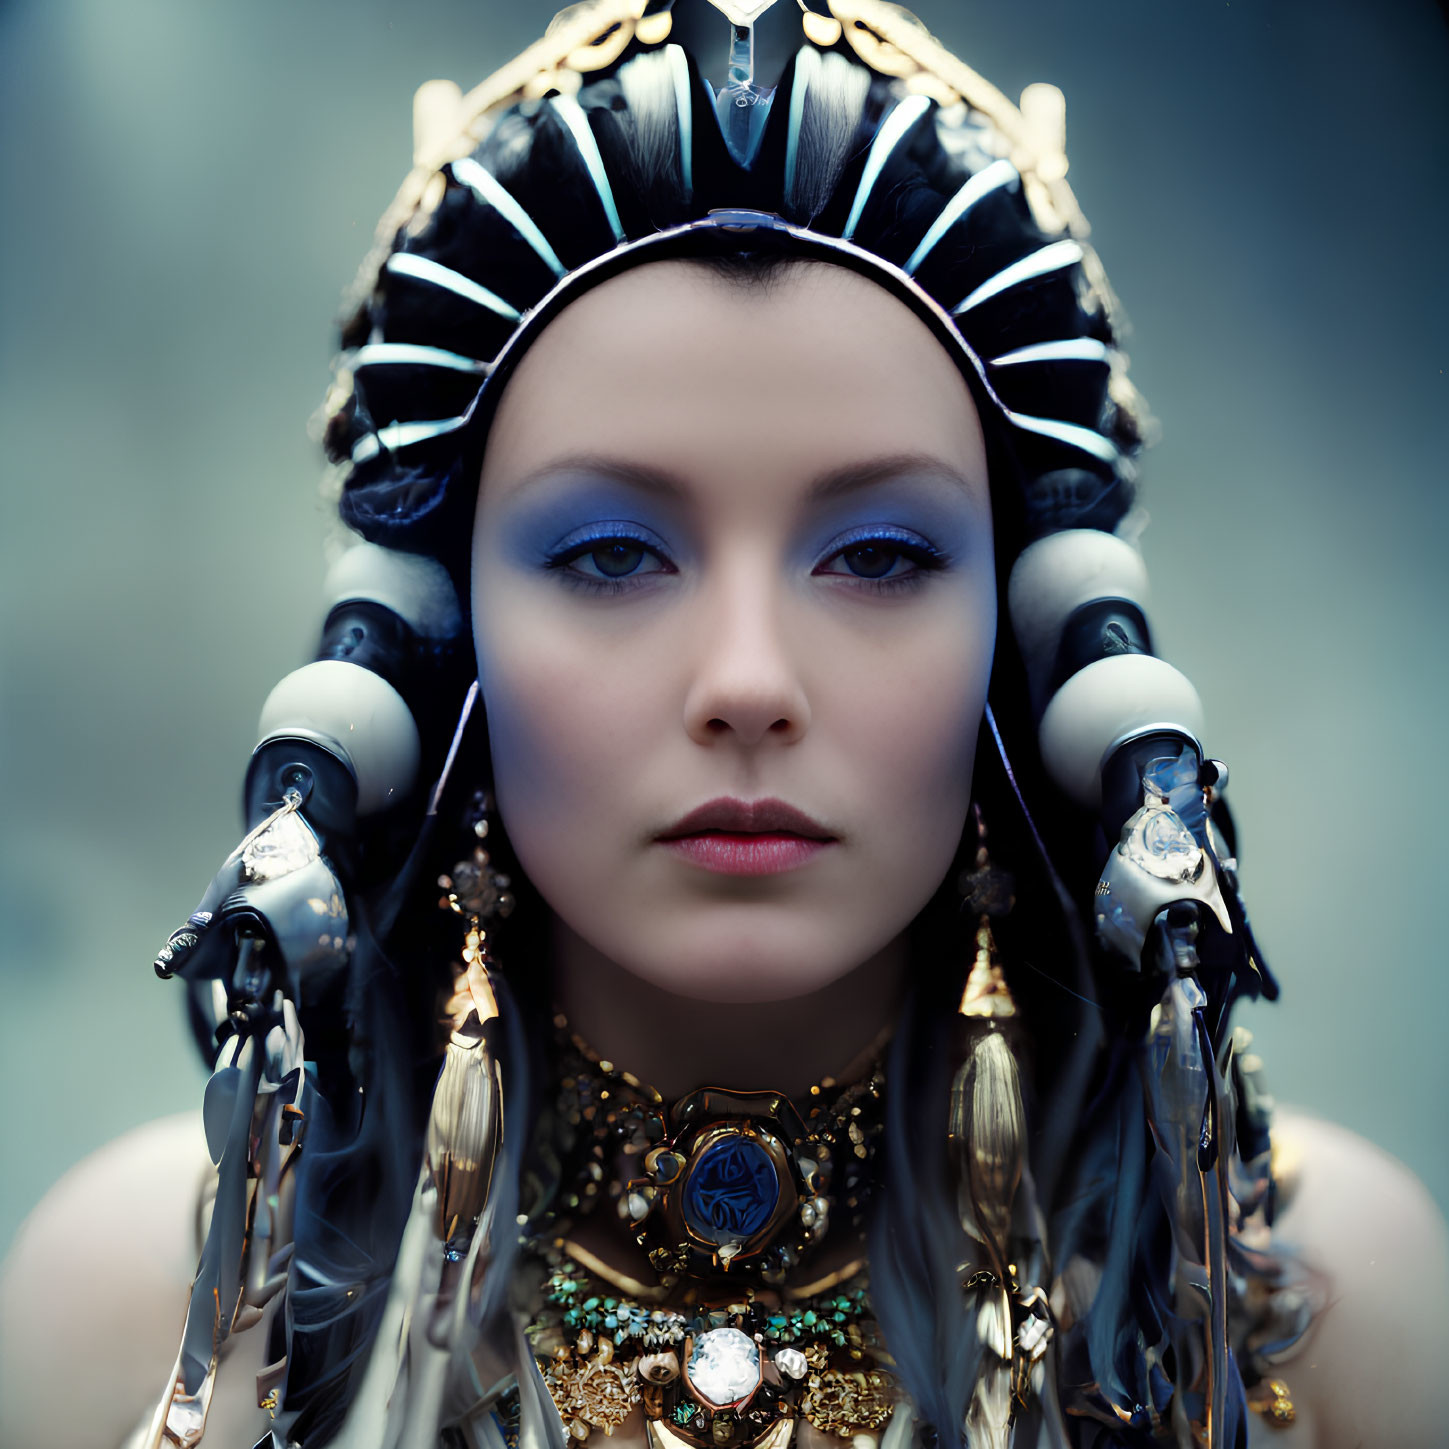 Futuristic cyborg portrait with black and white headdress and robotic arms